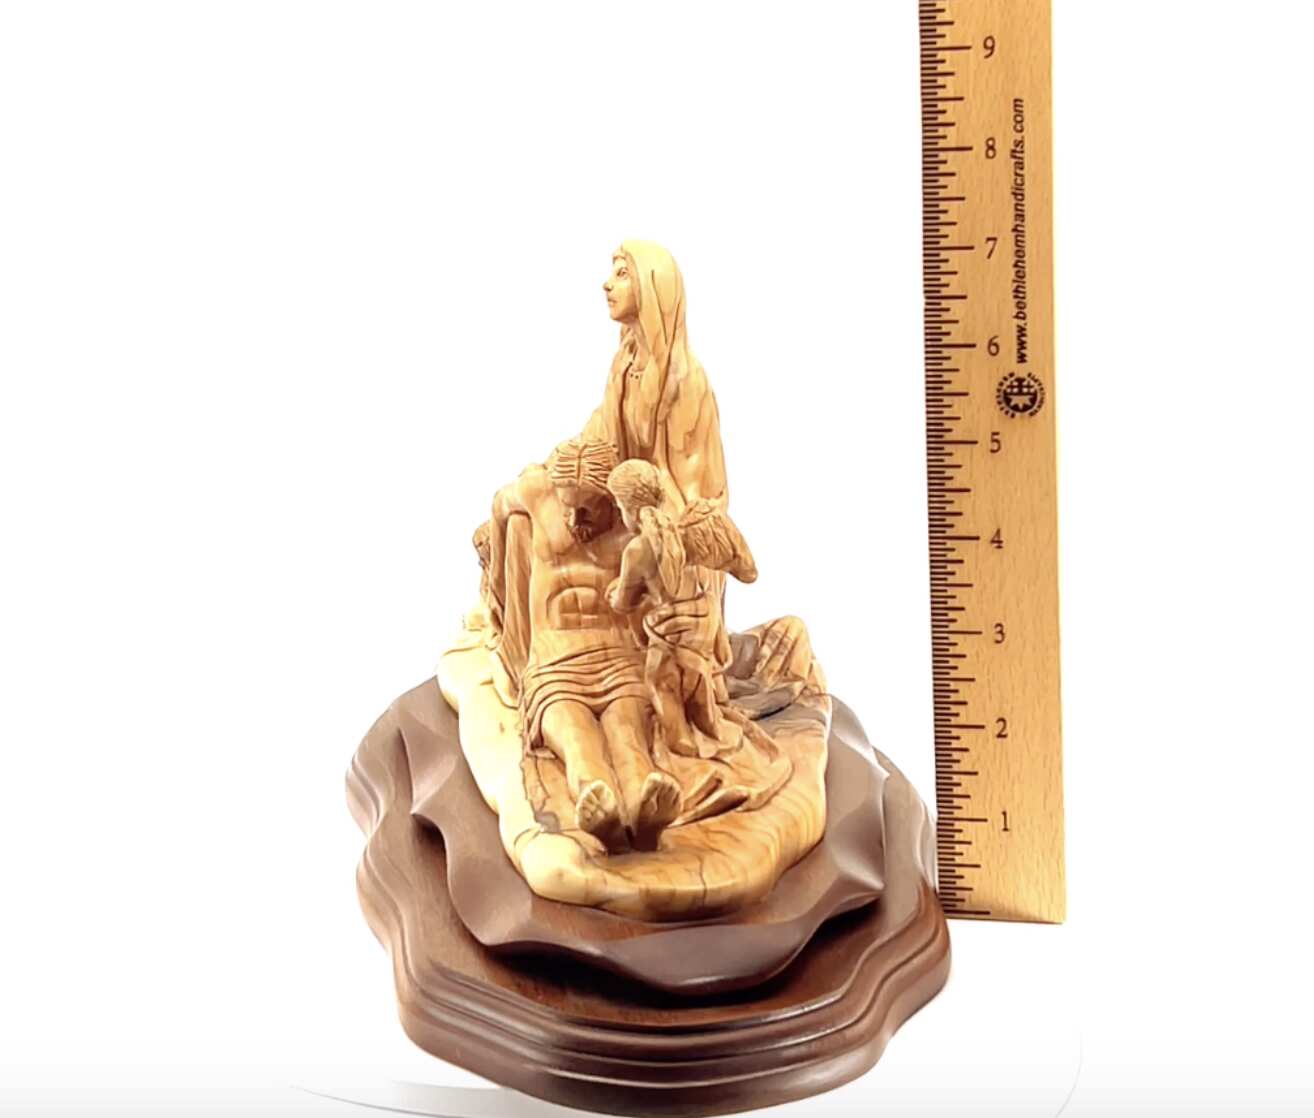 Pieta with 2 Angels, 12.2" Long Olive Wood Carving from Bethlehem, Virgin Mary with Jesus Christ